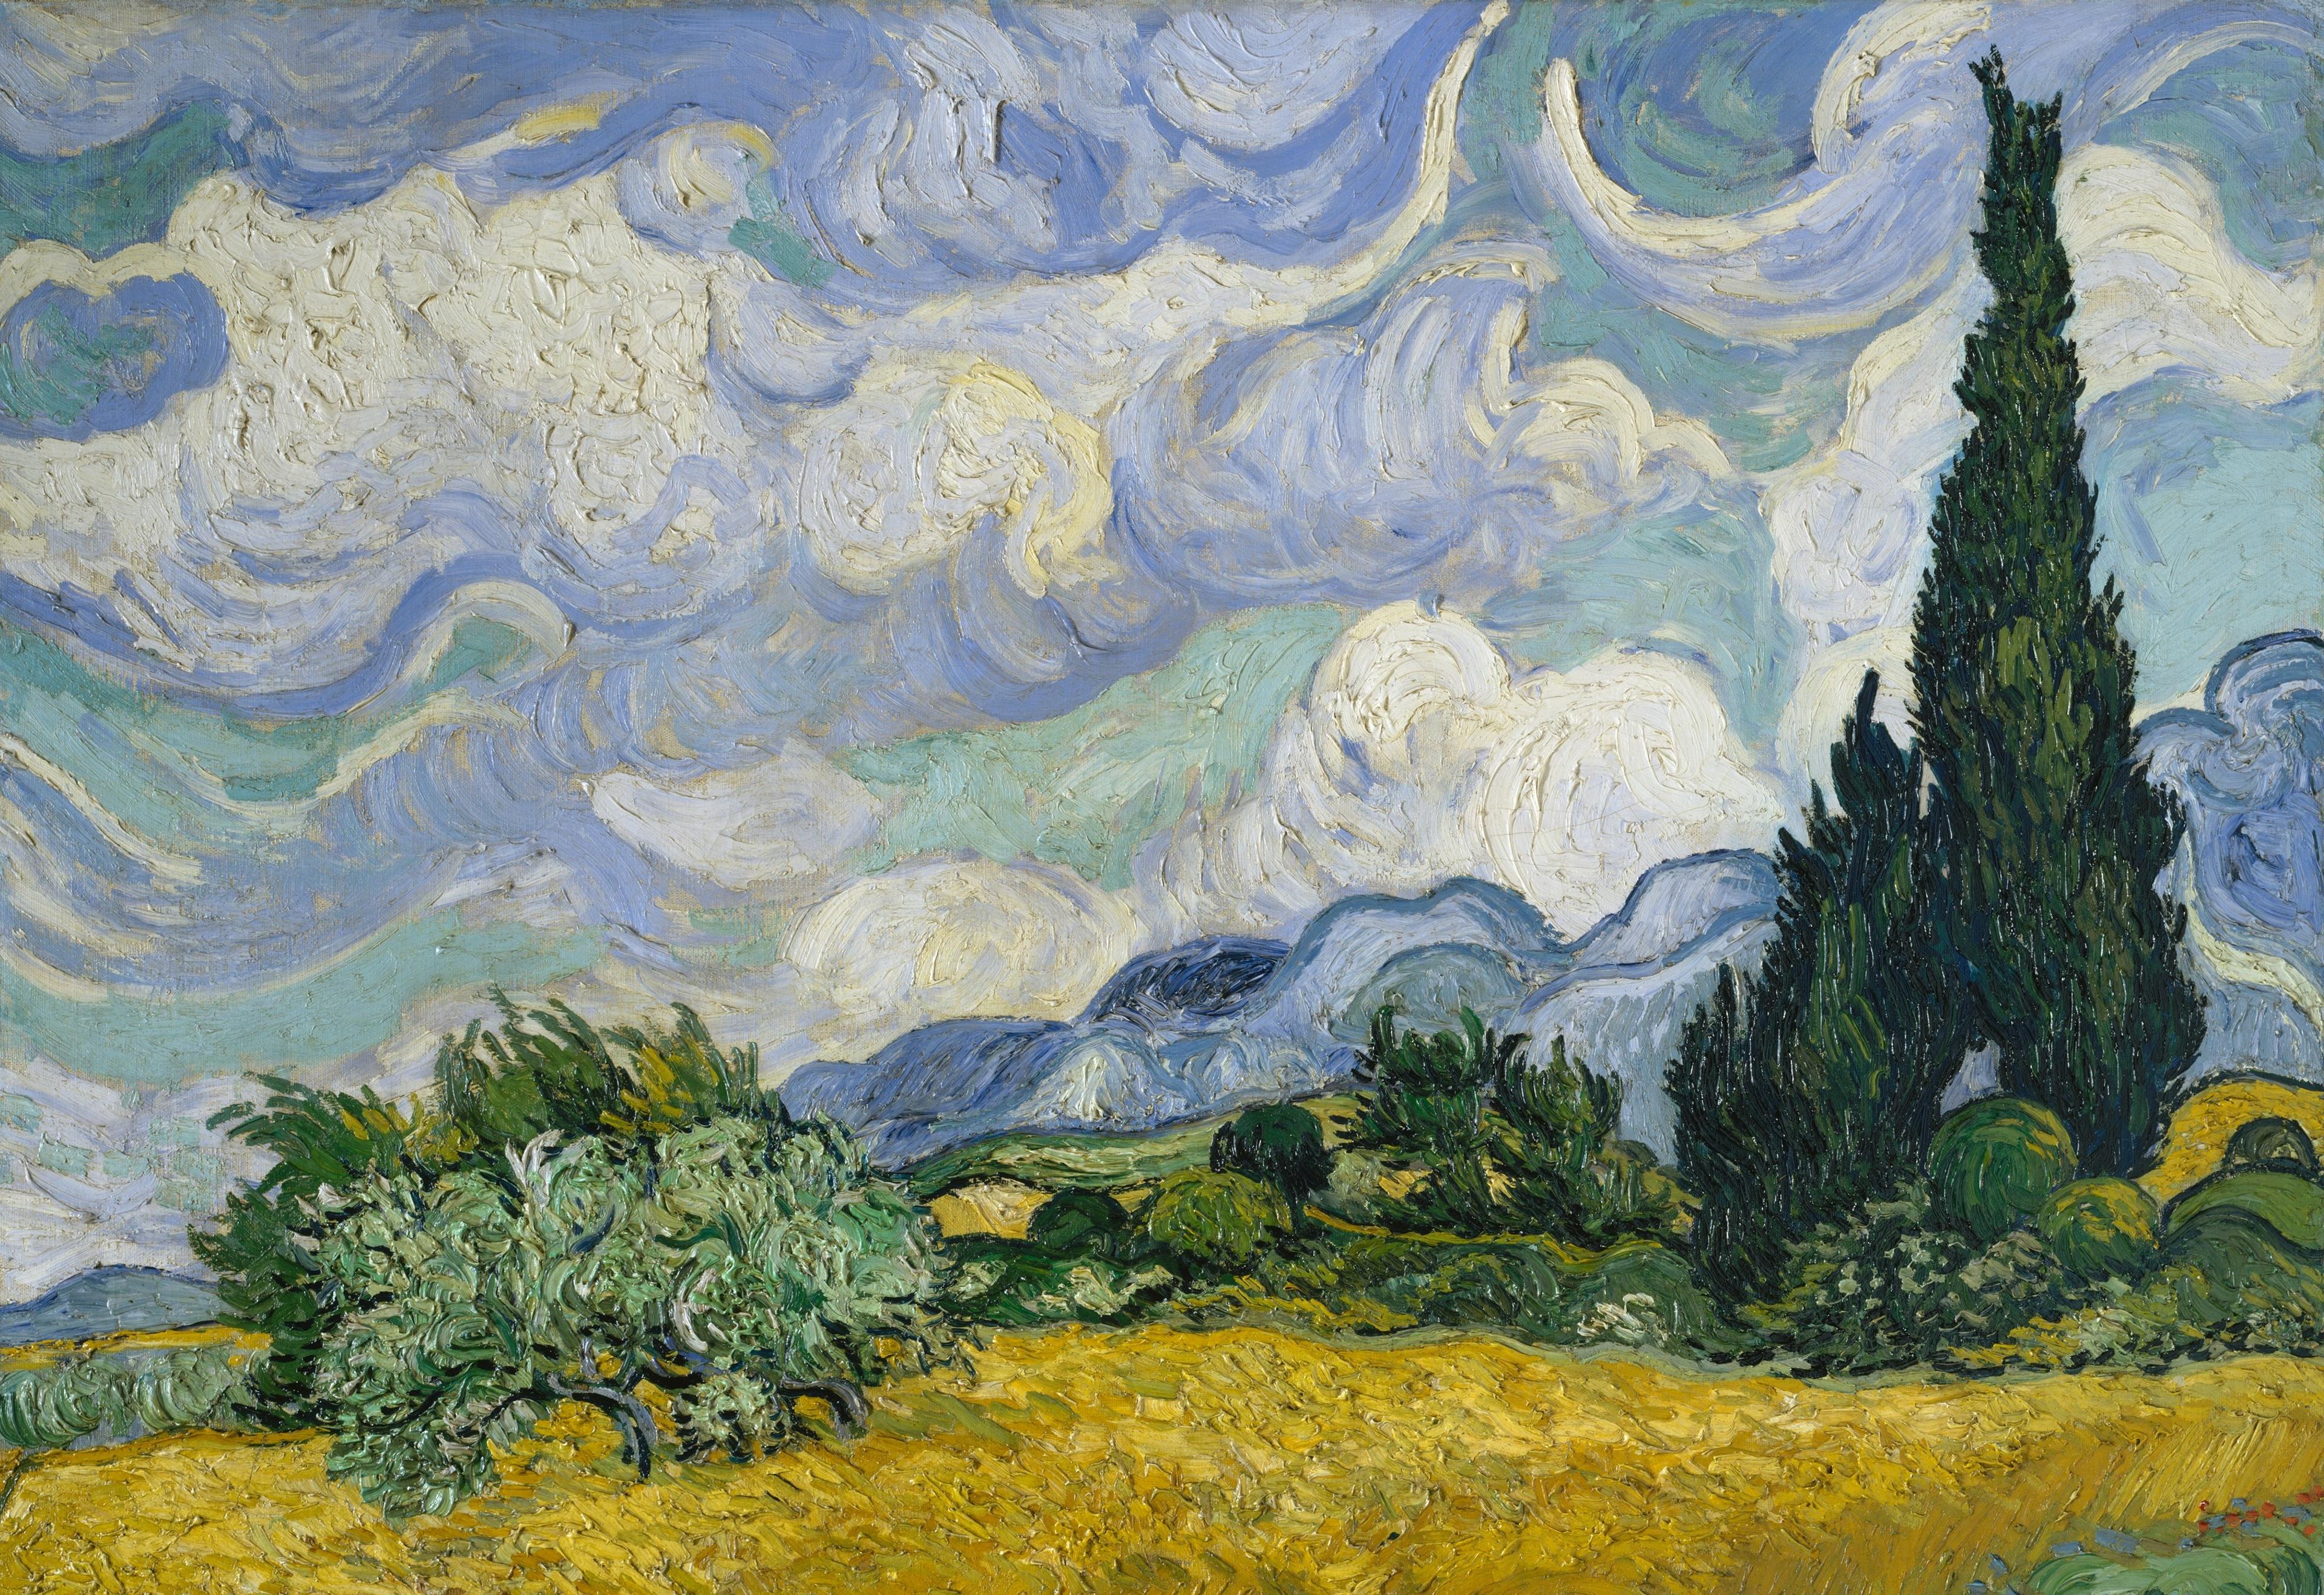 Van Gogh's "Wheat Field with Cypresses"--a swirling landscape of yellow fields, cloudy blue skies, and lush green cypress trees.